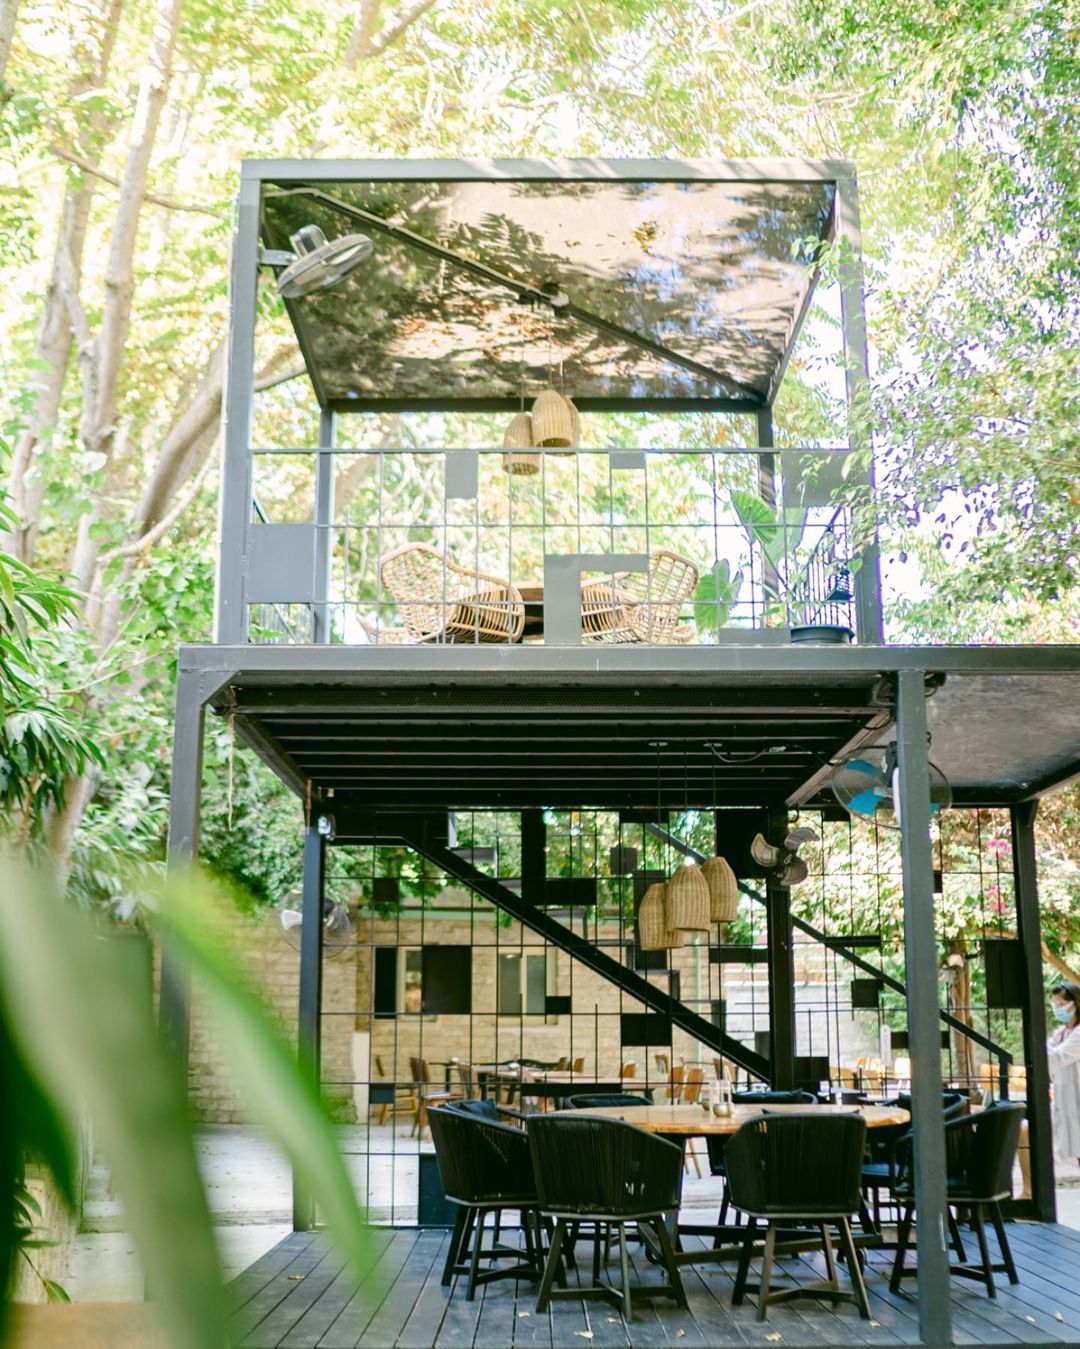 Treehouse table, the best place for your dinners at 𝐃𝐢𝐨𝐧𝐲𝐬𝐮𝐬 𝐌𝐚𝐧𝐬𝐢𝐨𝐧